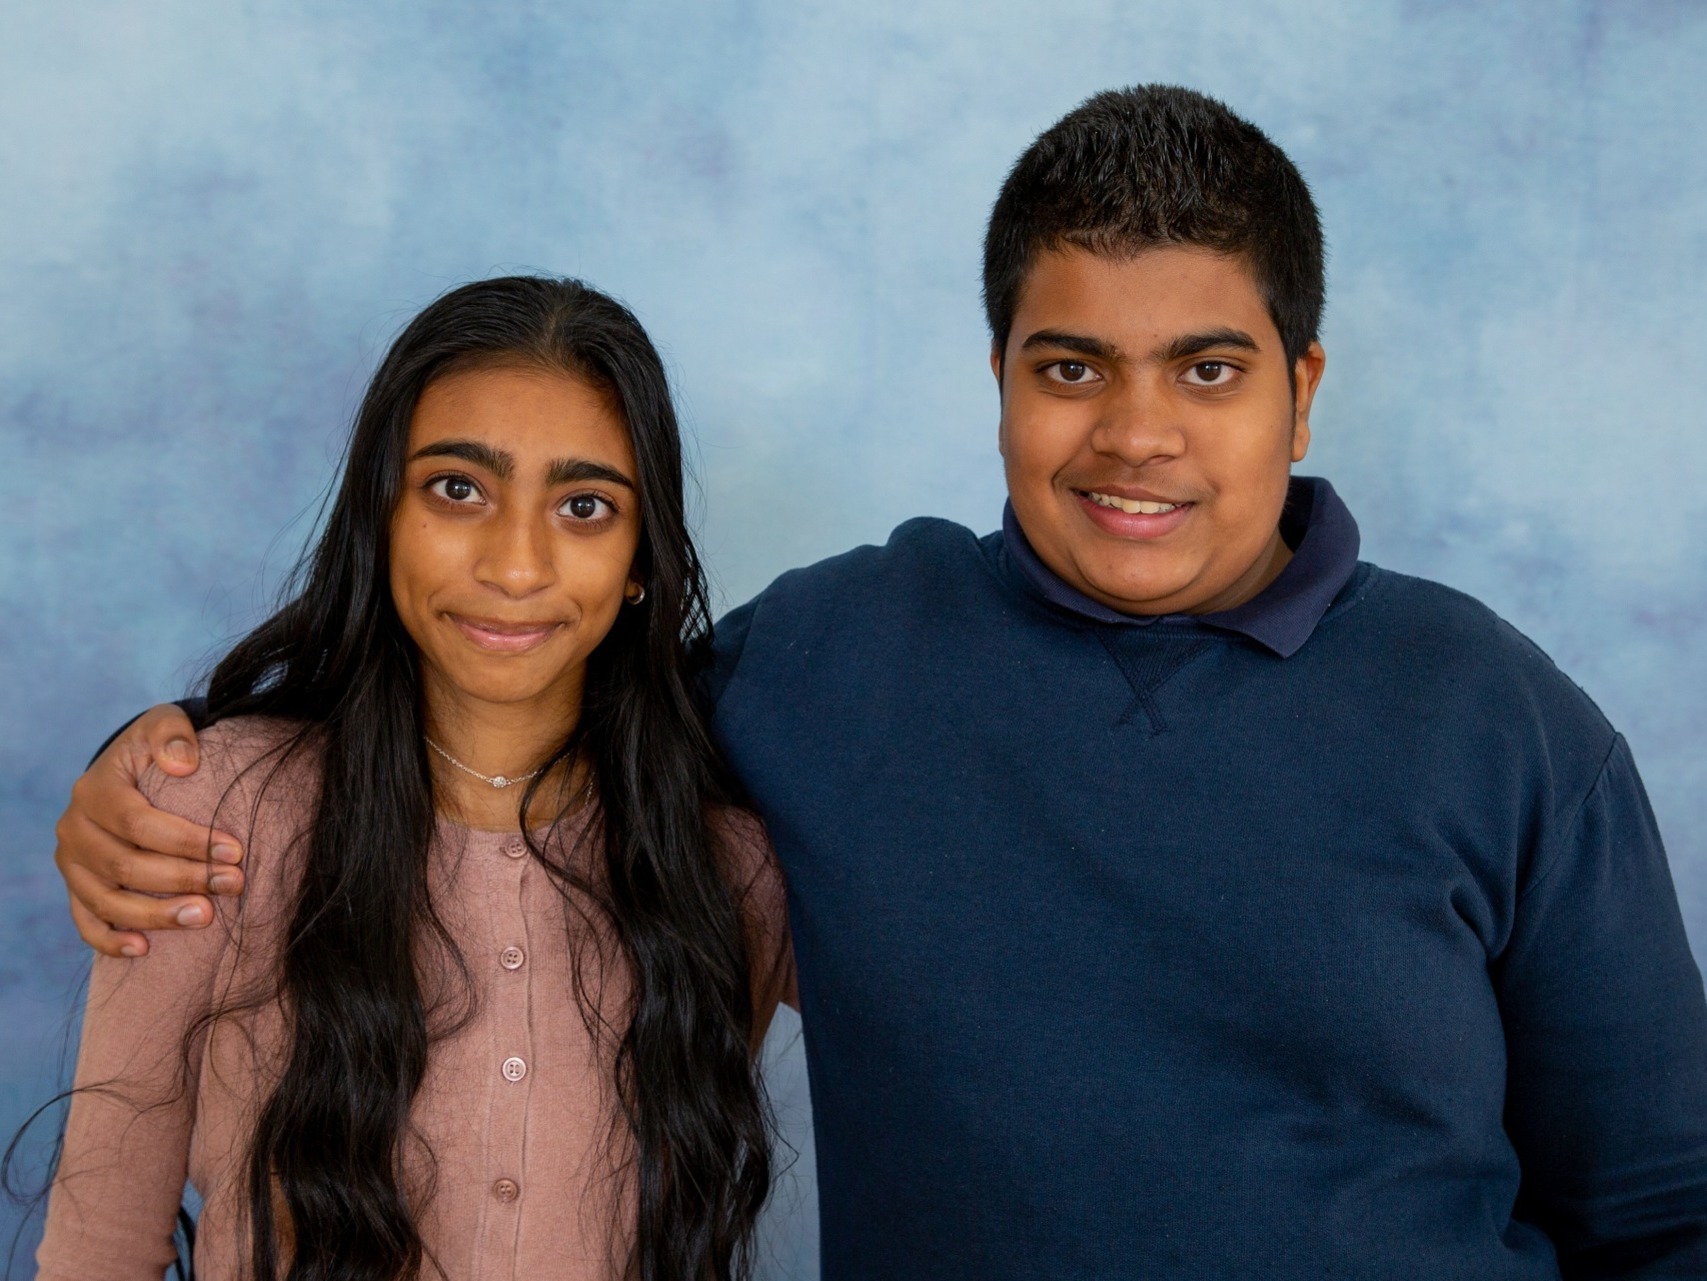 Sibling love - brother and sister sharing a school photo in our Special Educational Needs photo sessions